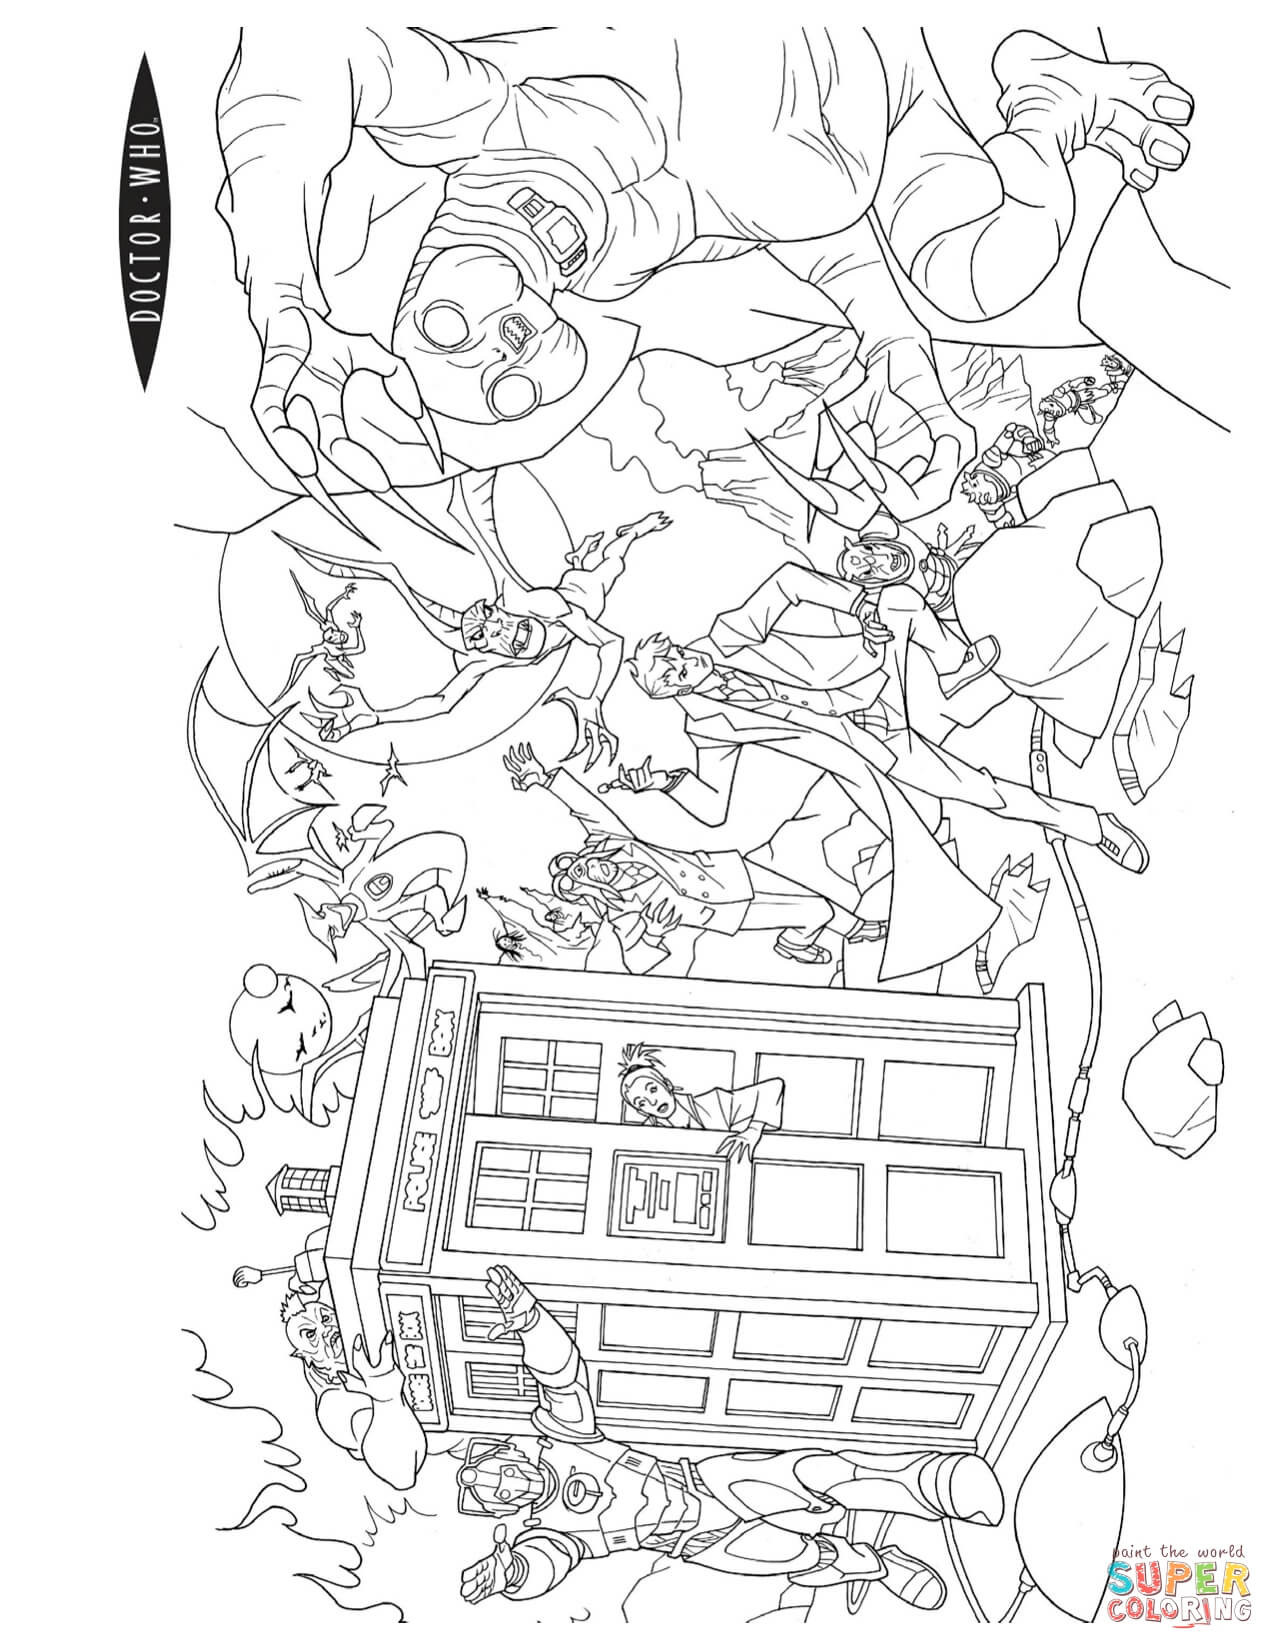 Doctor Who Coloring Pages
 Action Scene from Doctor Who coloring page